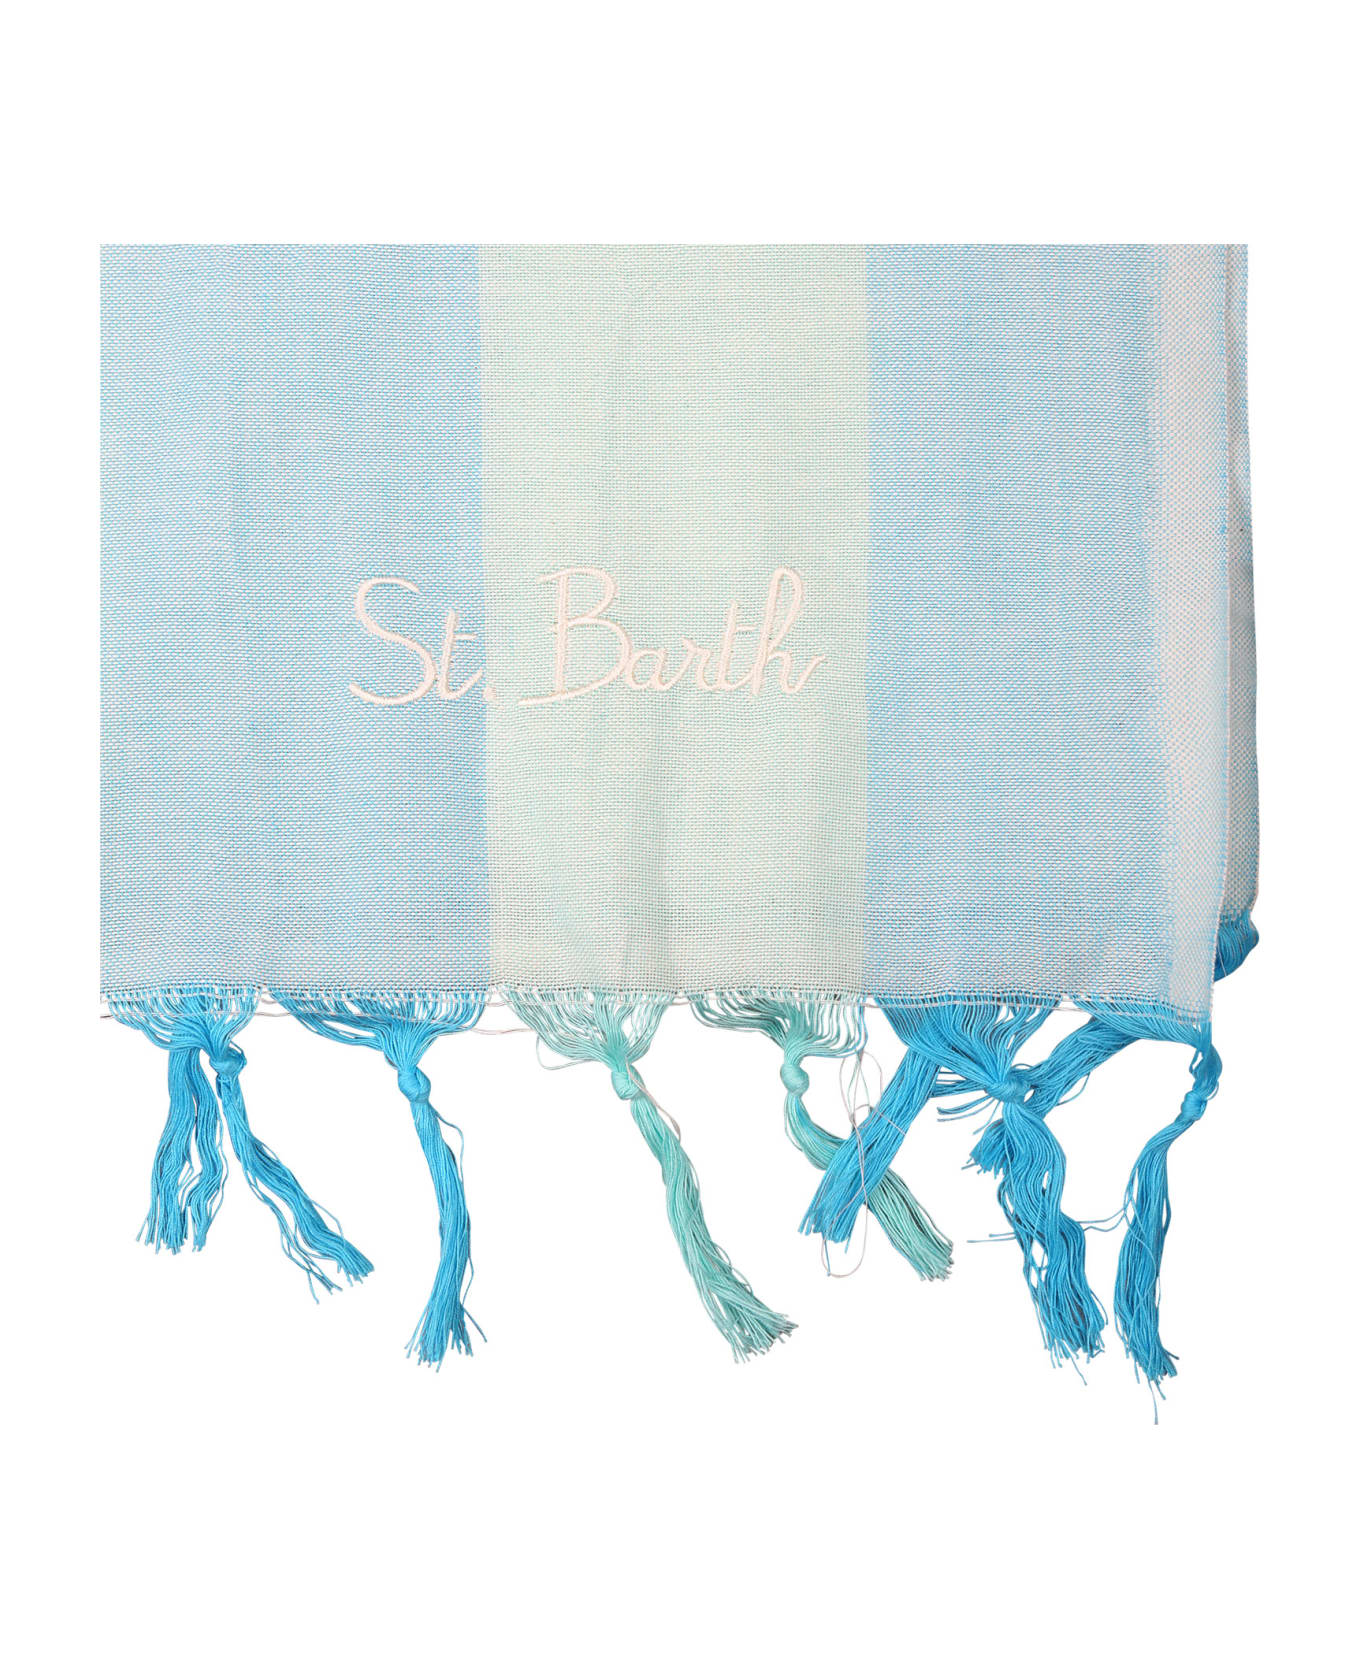 MC2 Saint Barth Light Blue Beach Towel For Kids With Logo - Multicolor アクセサリー＆ギフト